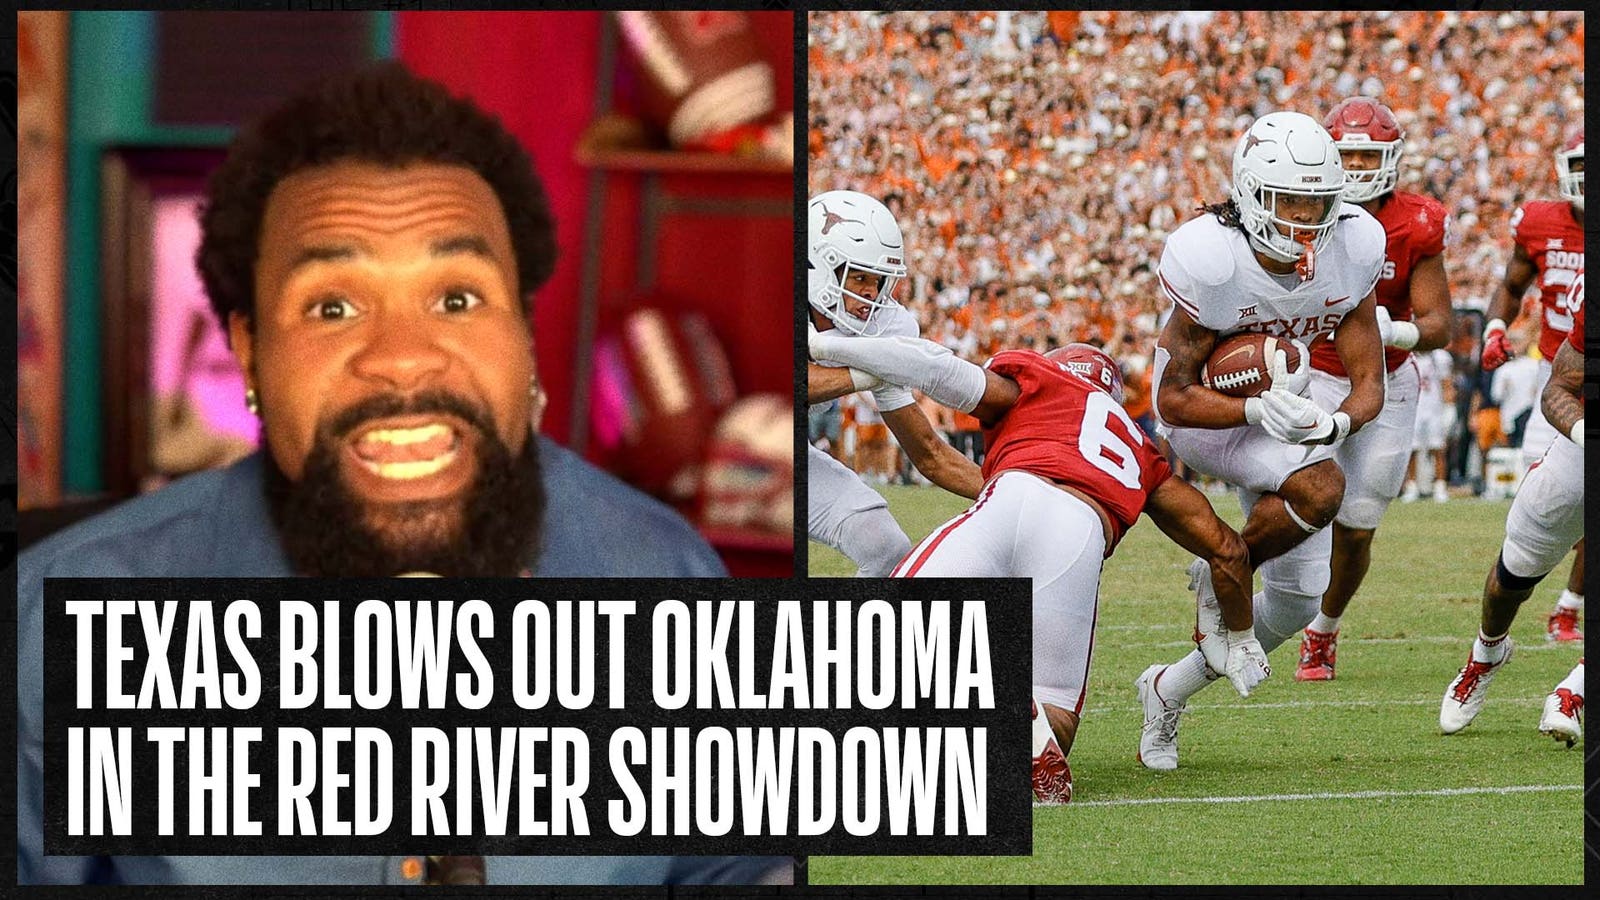 Oklahoma blew up in the Red River Showdown